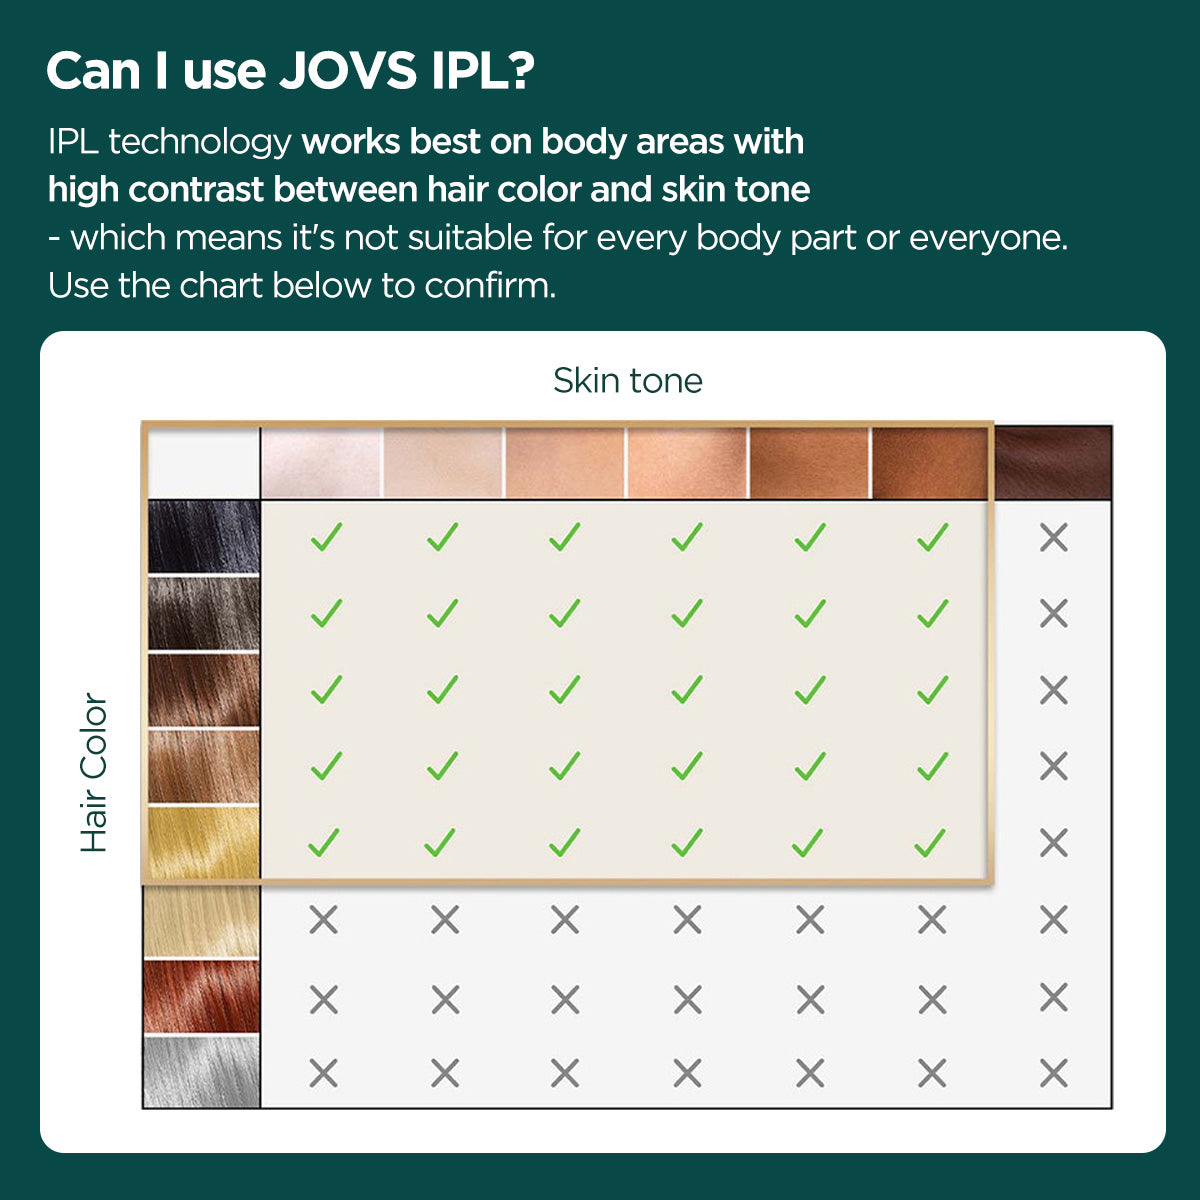 Compatibility chart for JOVS IPL, indicating optimal use for various hair colors and skin tones, ensuring safe and effective hair removal.